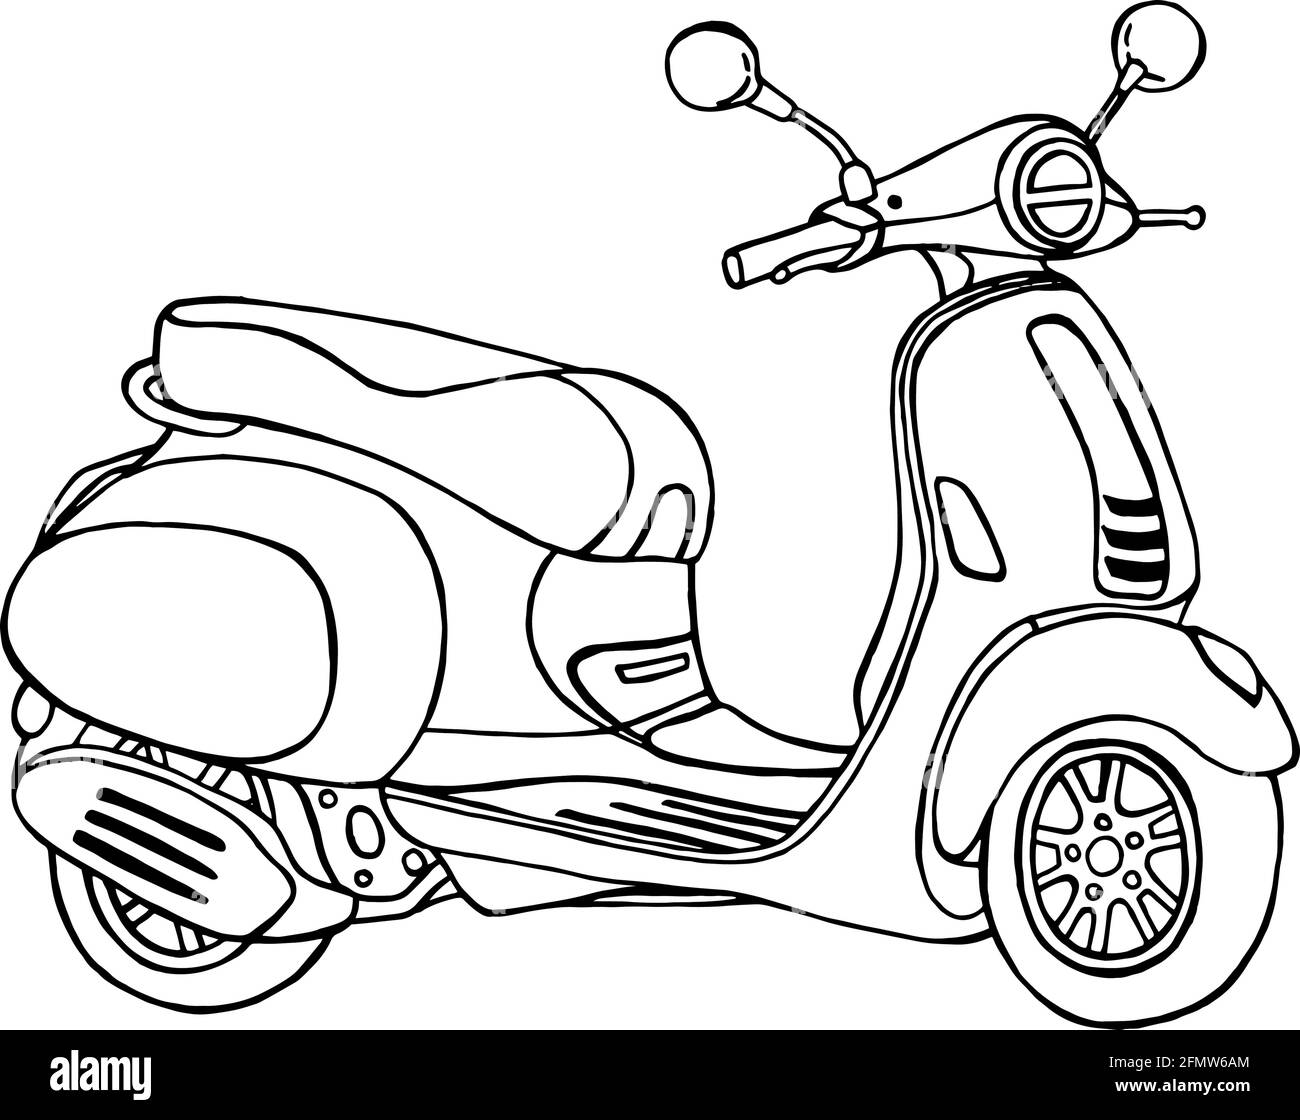 Vintage scooter Black and White Stock Photos & Images - Alamy